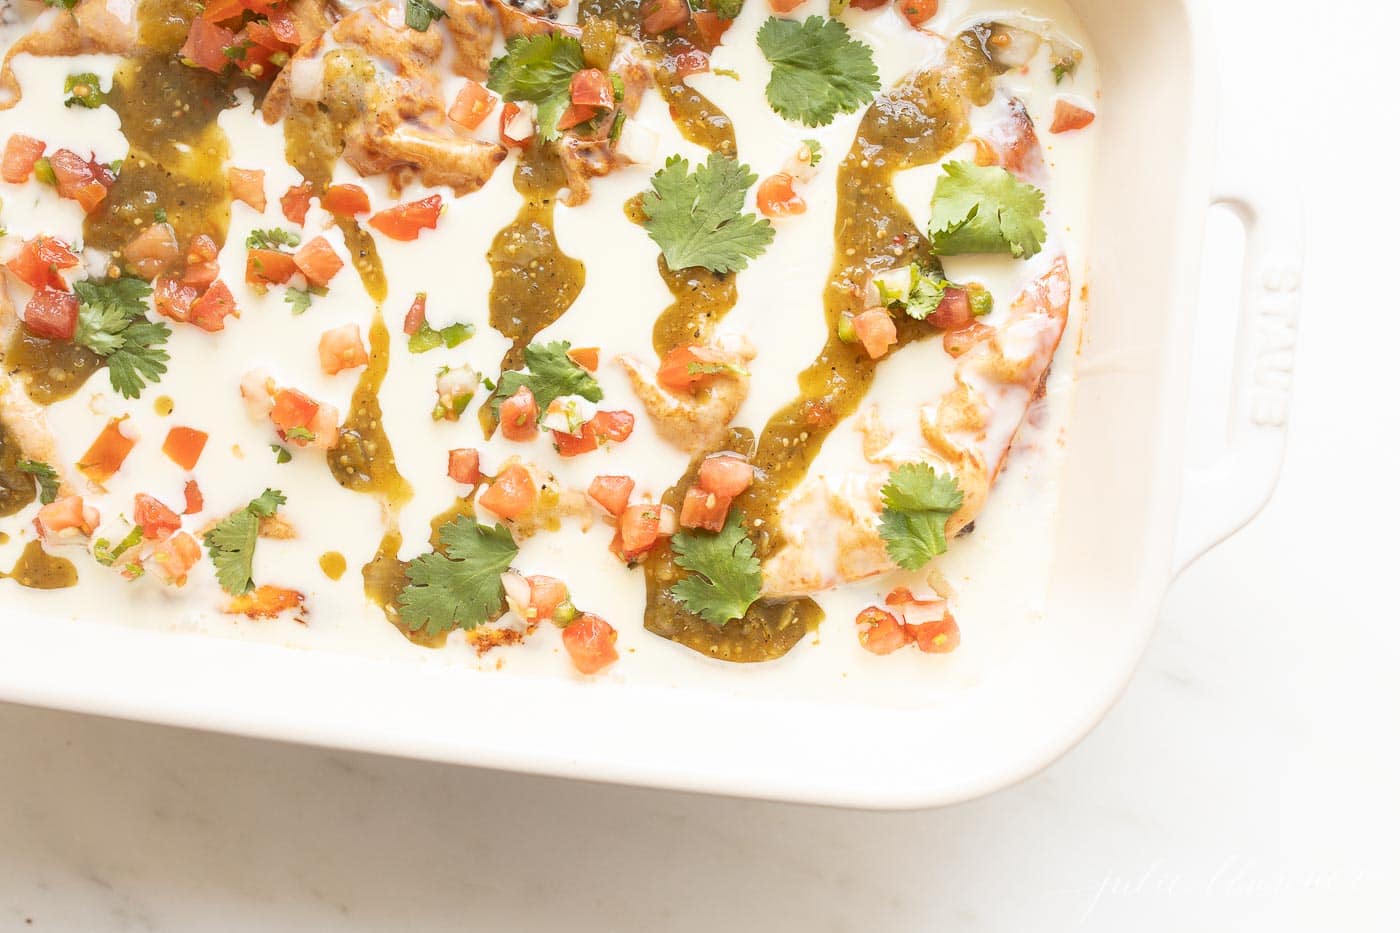 A breakfast burrito casserole topped with queso and salsa